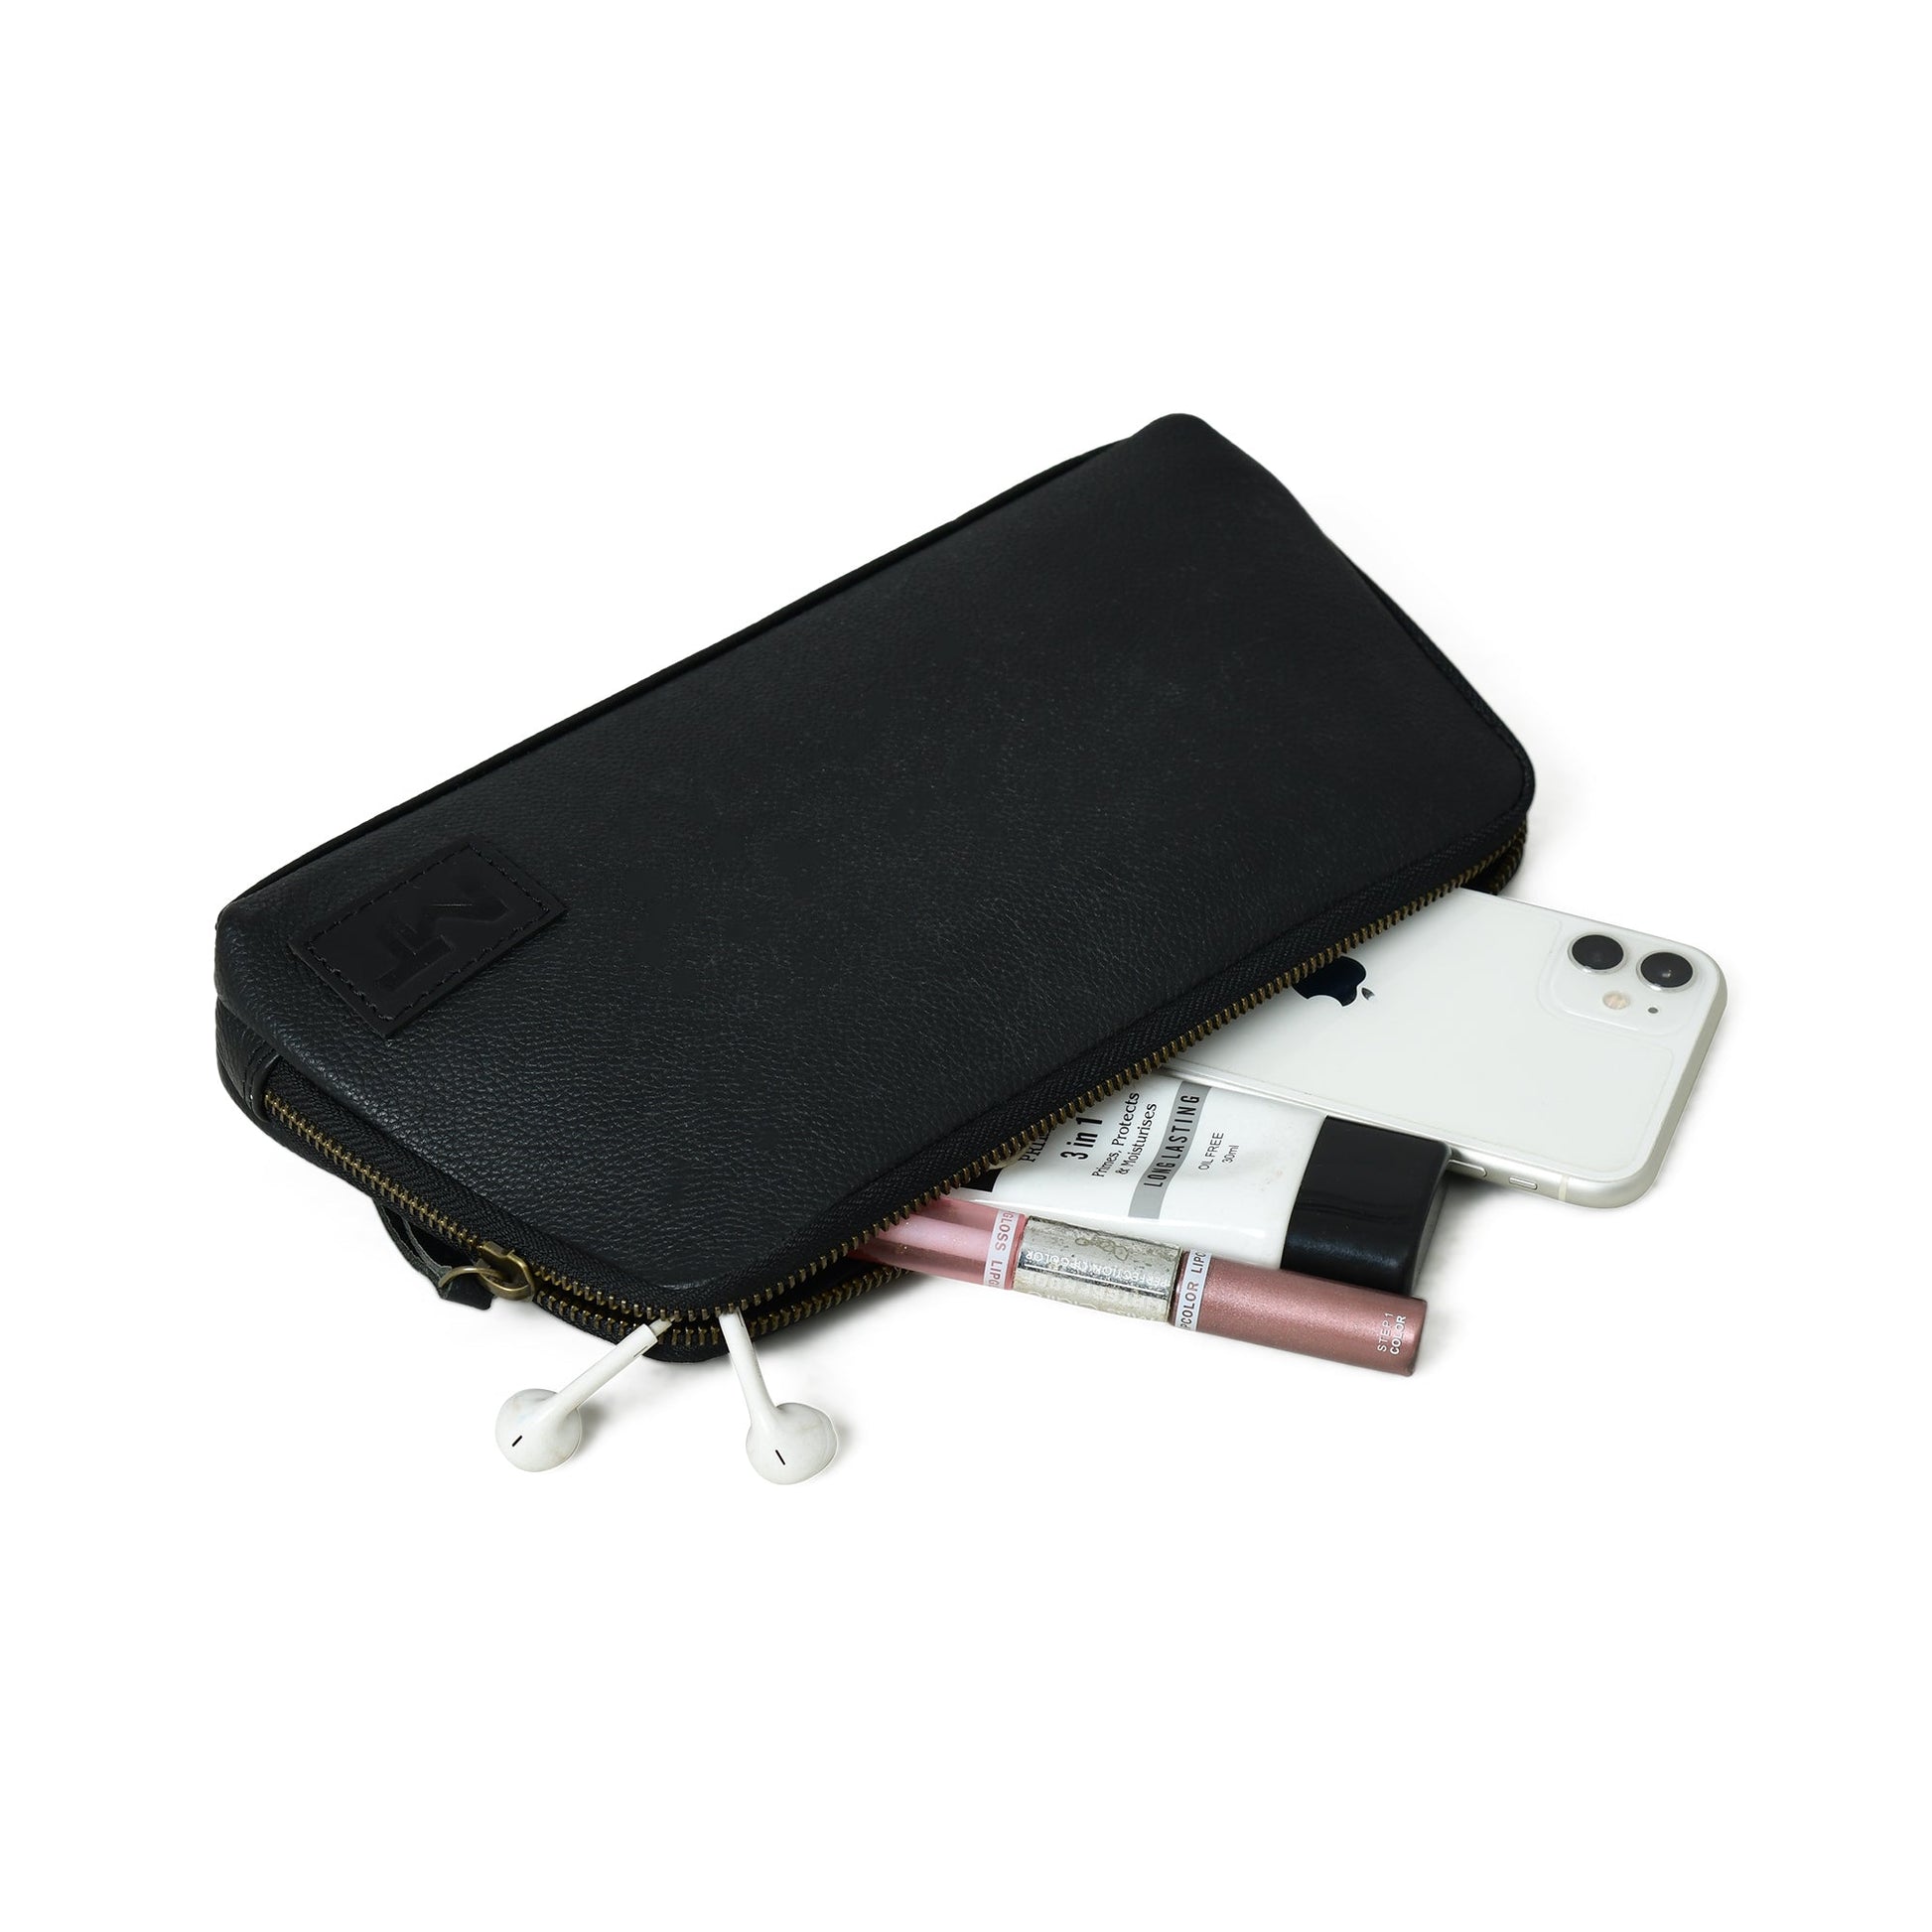 Classic Black Leather Clutch - The Tool Store